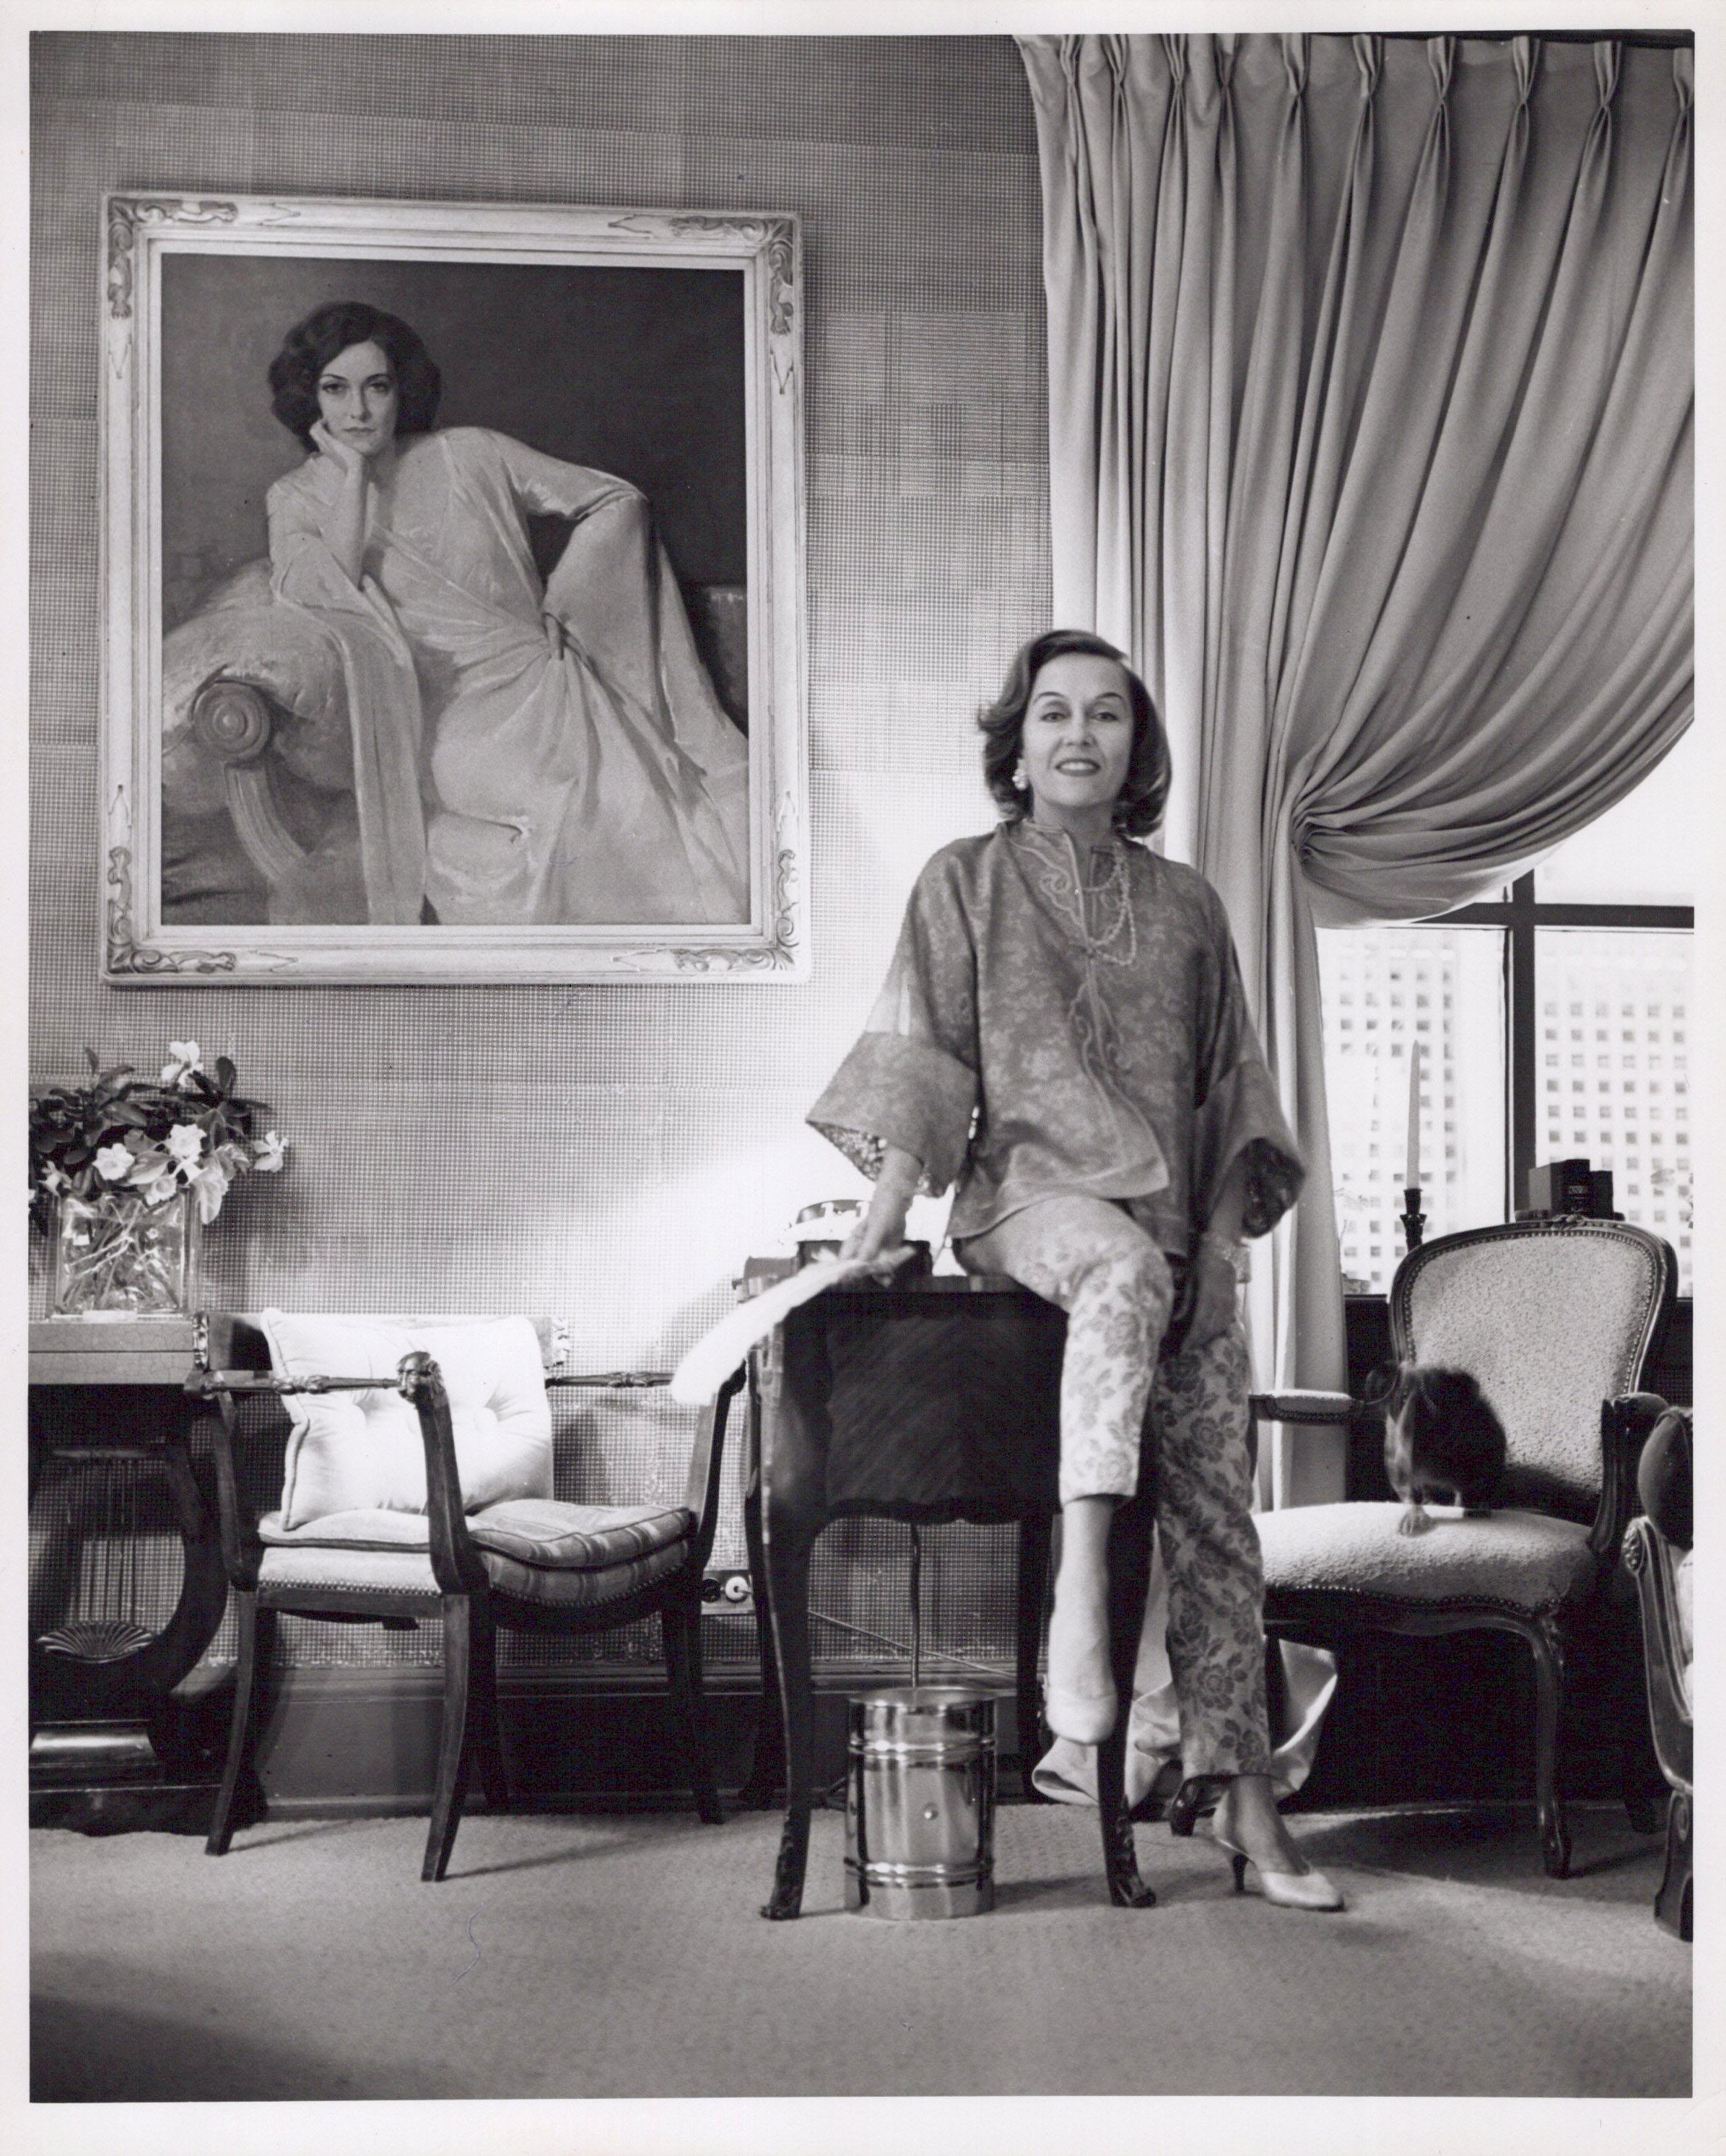 Jack Mitchell Black and White Photograph - Stage and Screen Star Gloria Swanson with 'Sunset Boulevard' painting of herself